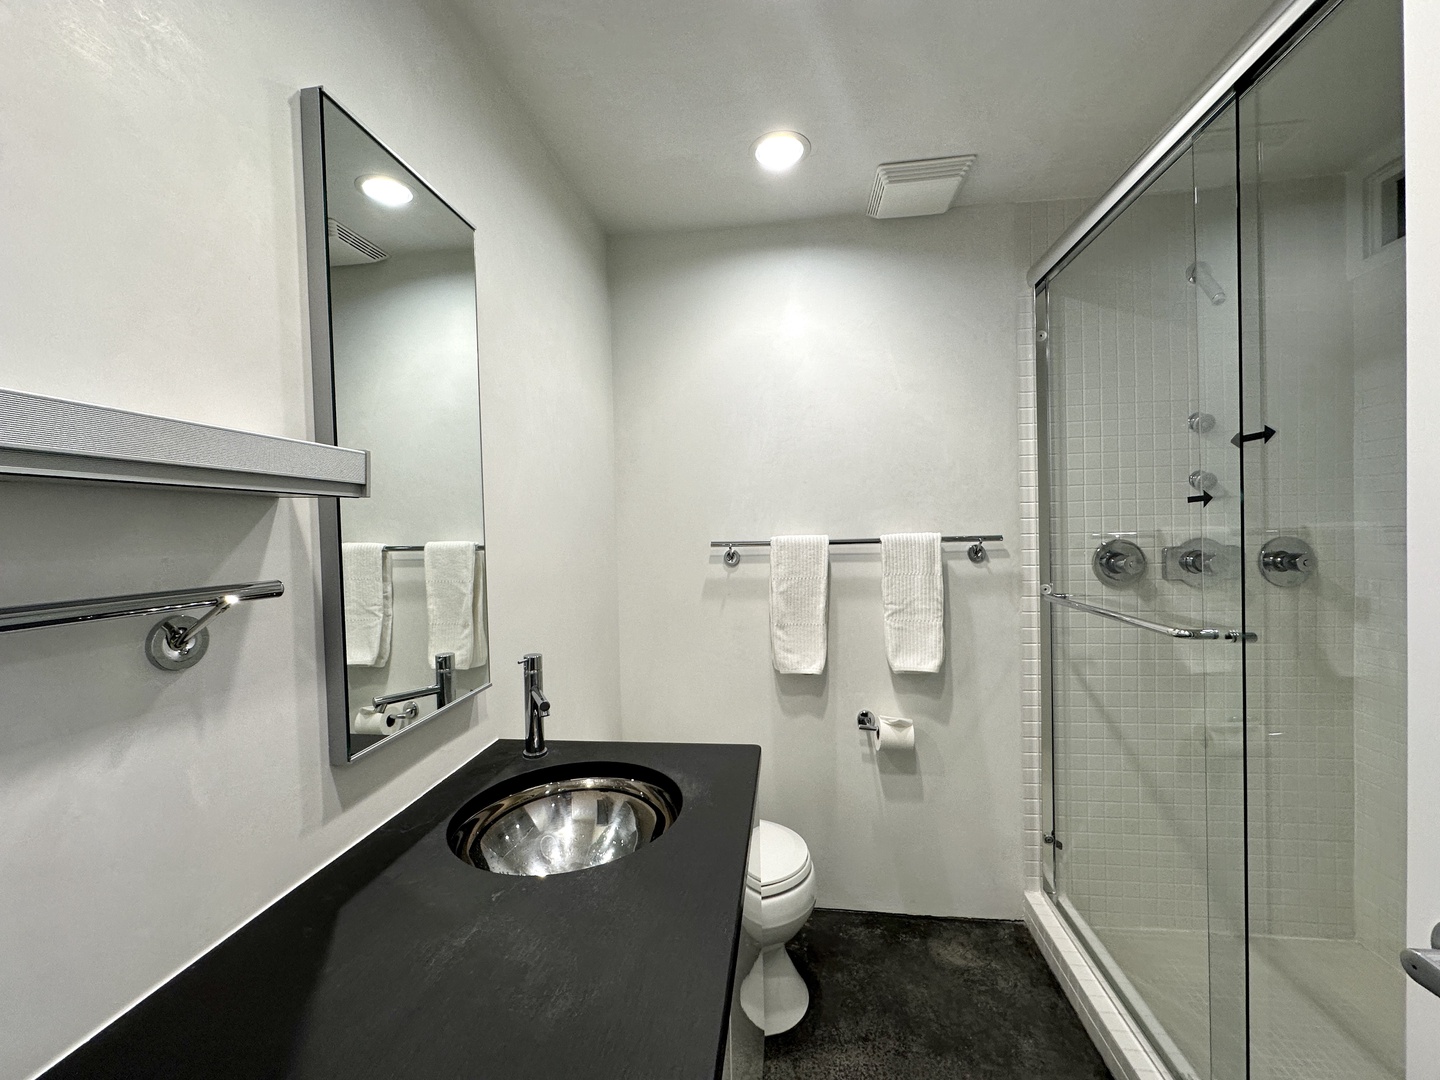 A second main-level ensuite offers a large vanity & glass shower